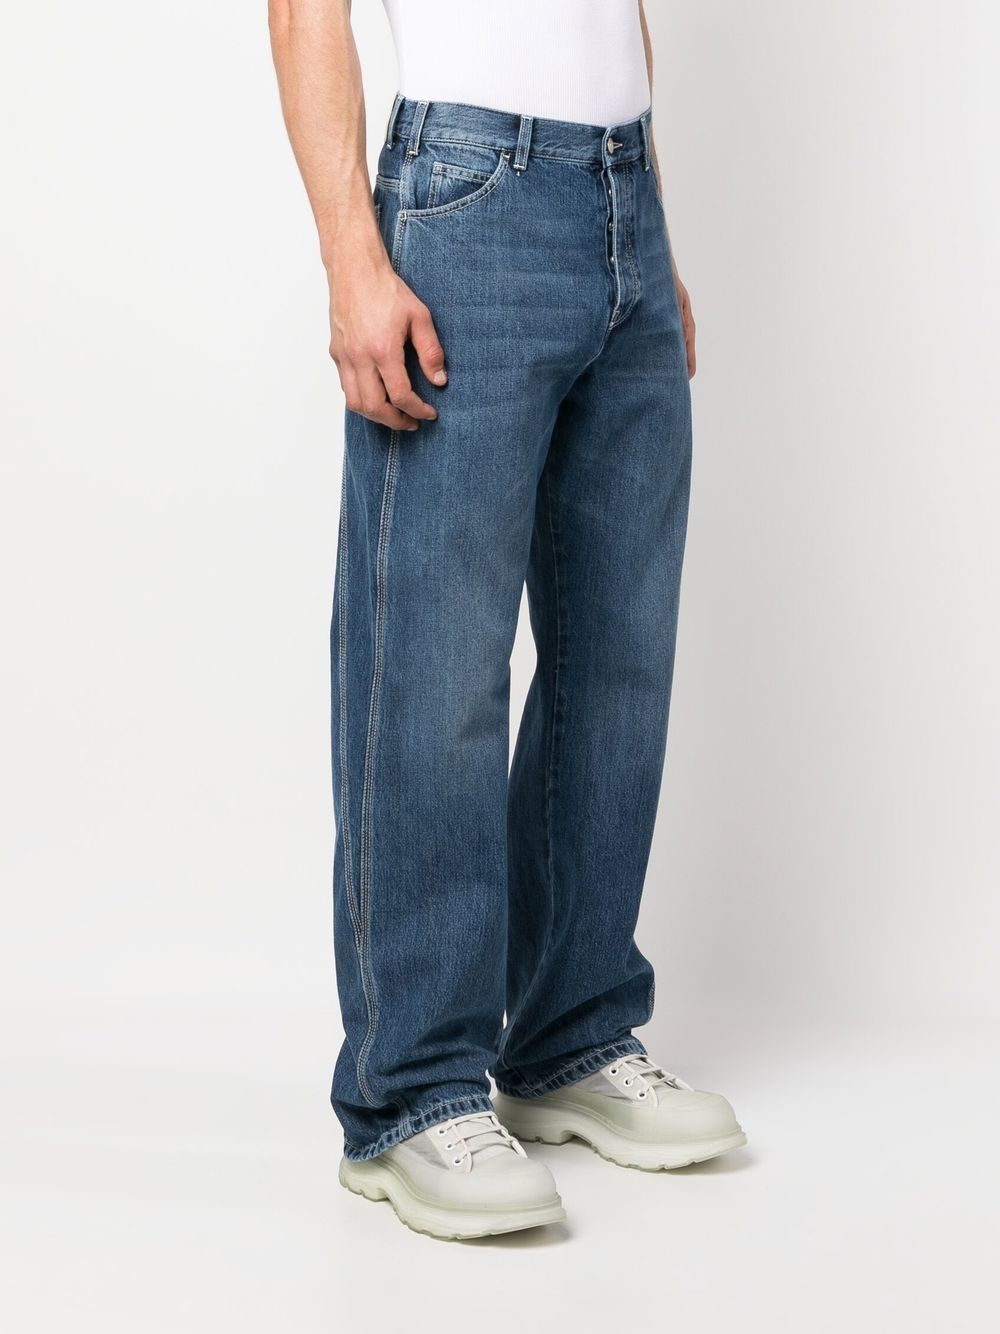 ALEXANDER MCQUEEN BLUE WASHED JEANS